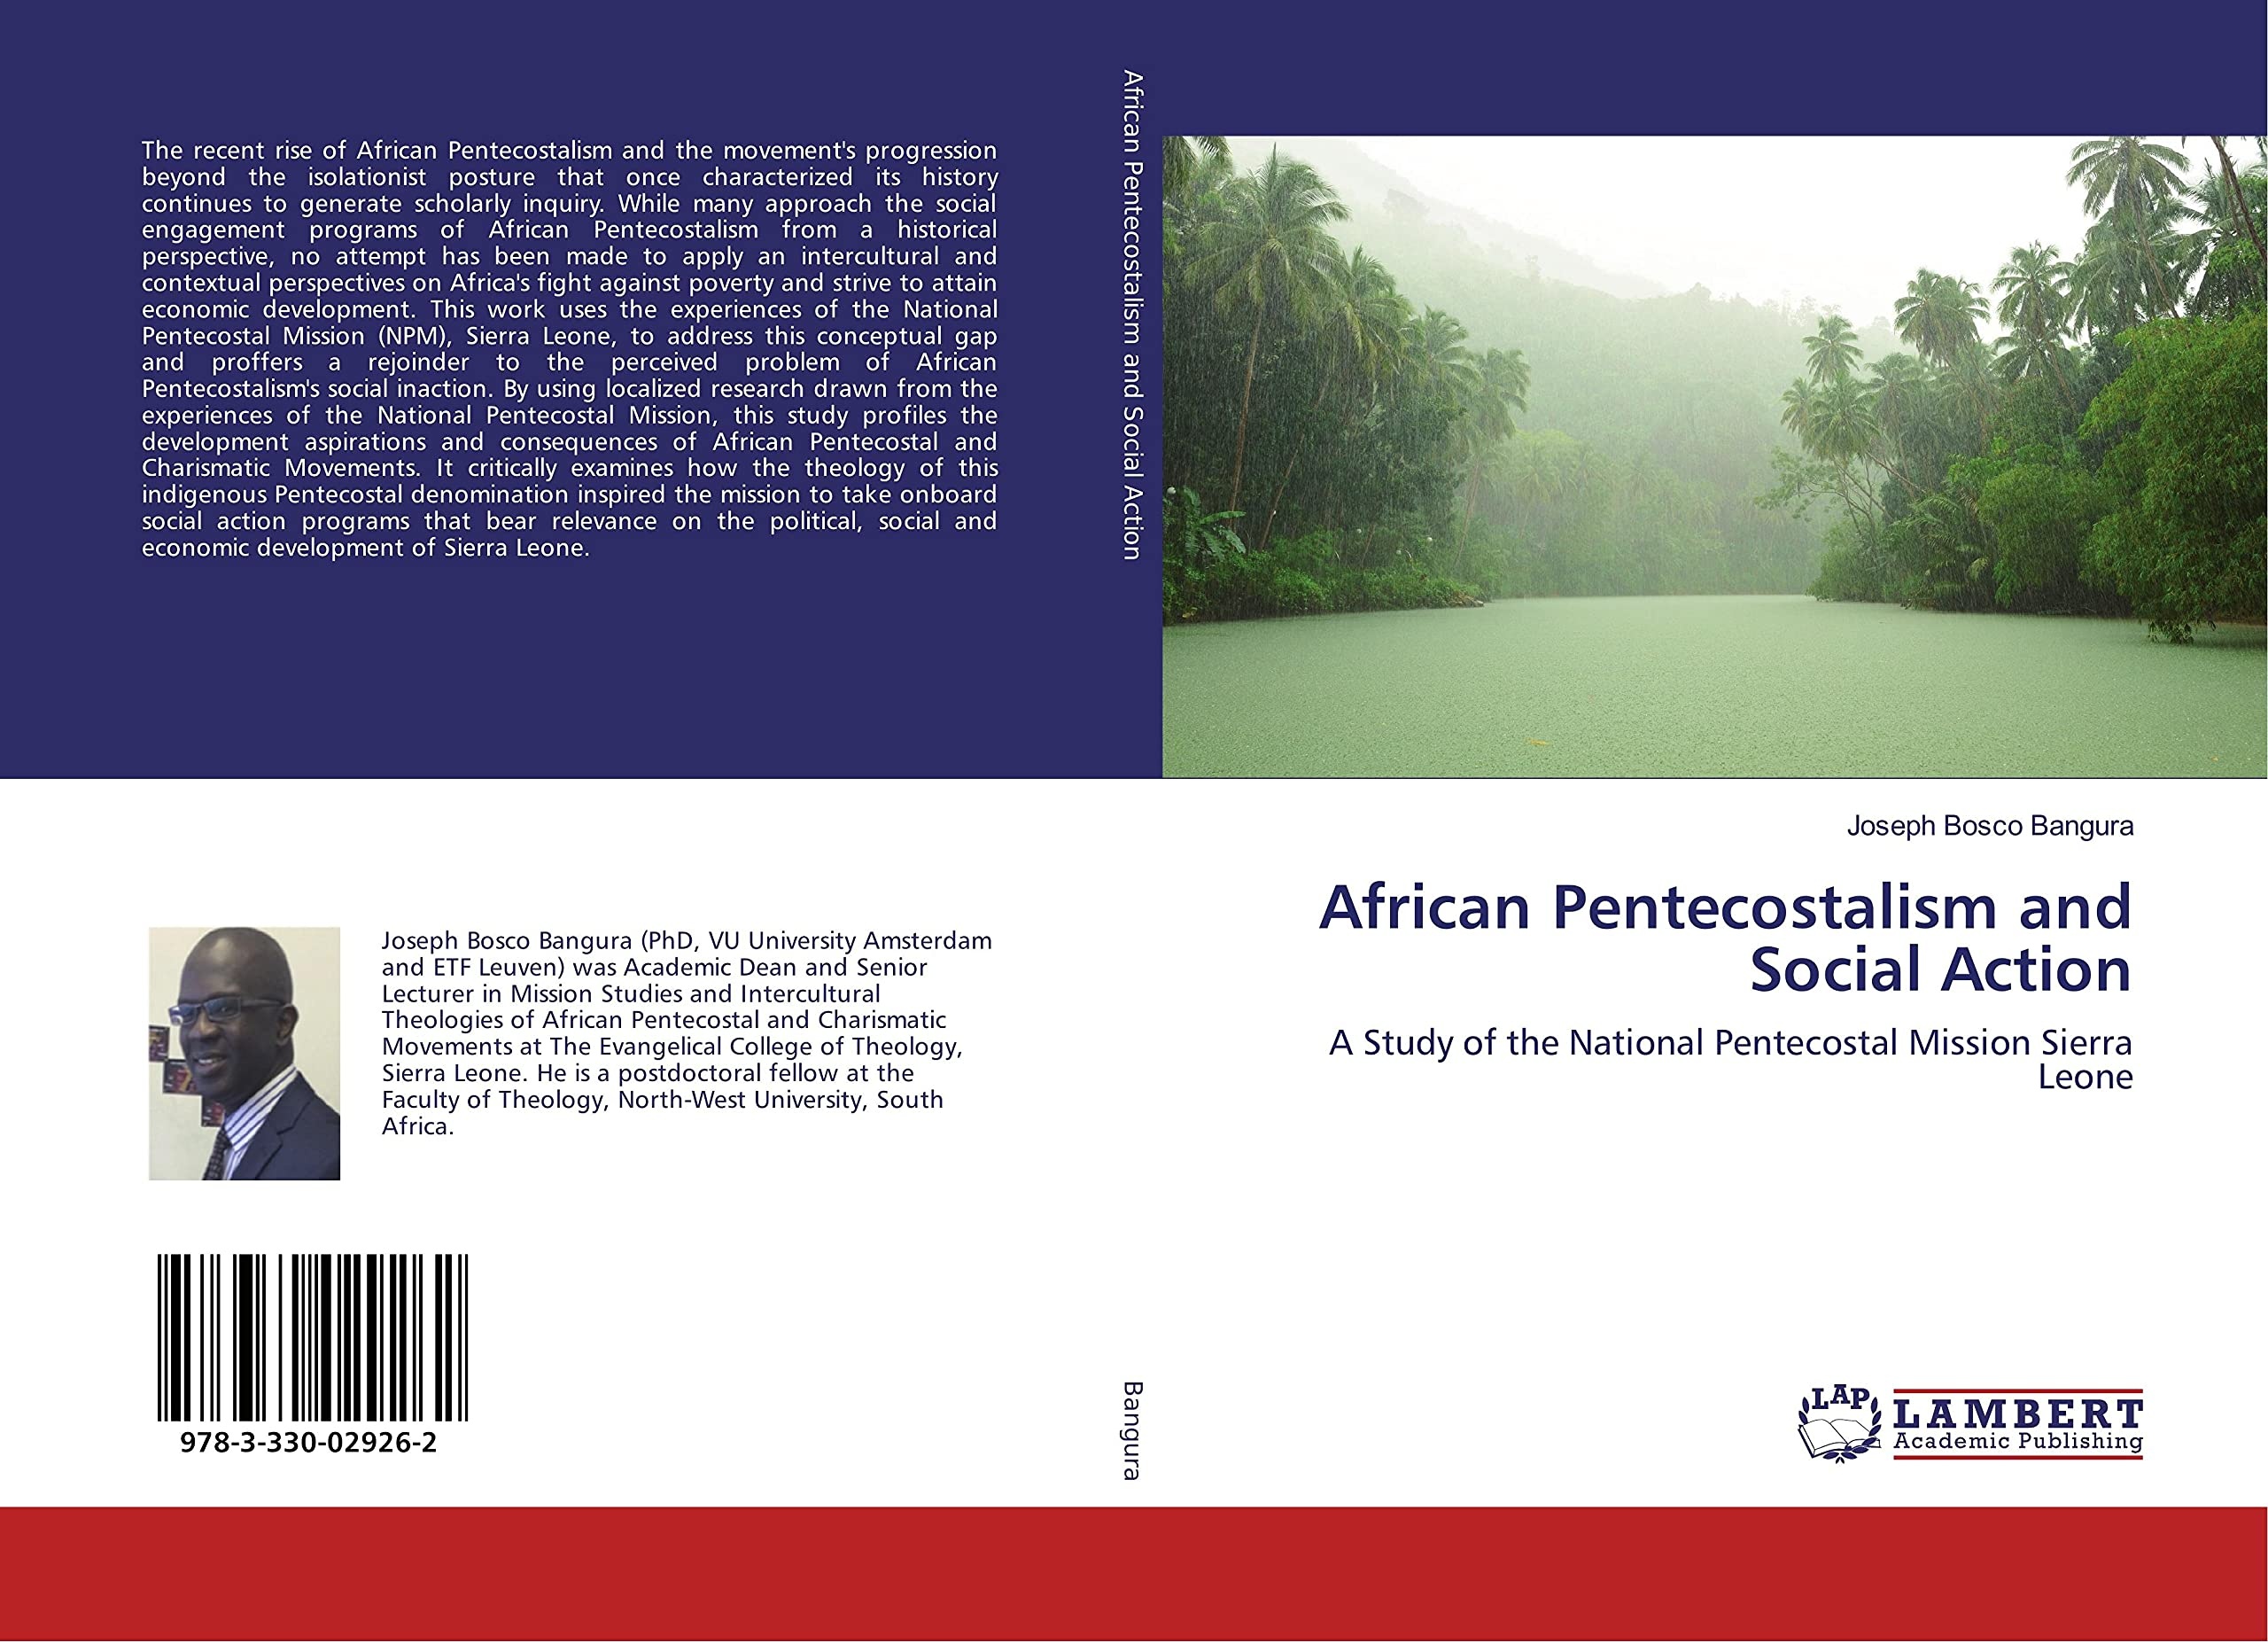 African Pentecostalism and Social Action: A Study of The National Pentecostal Mission Sierra Leone